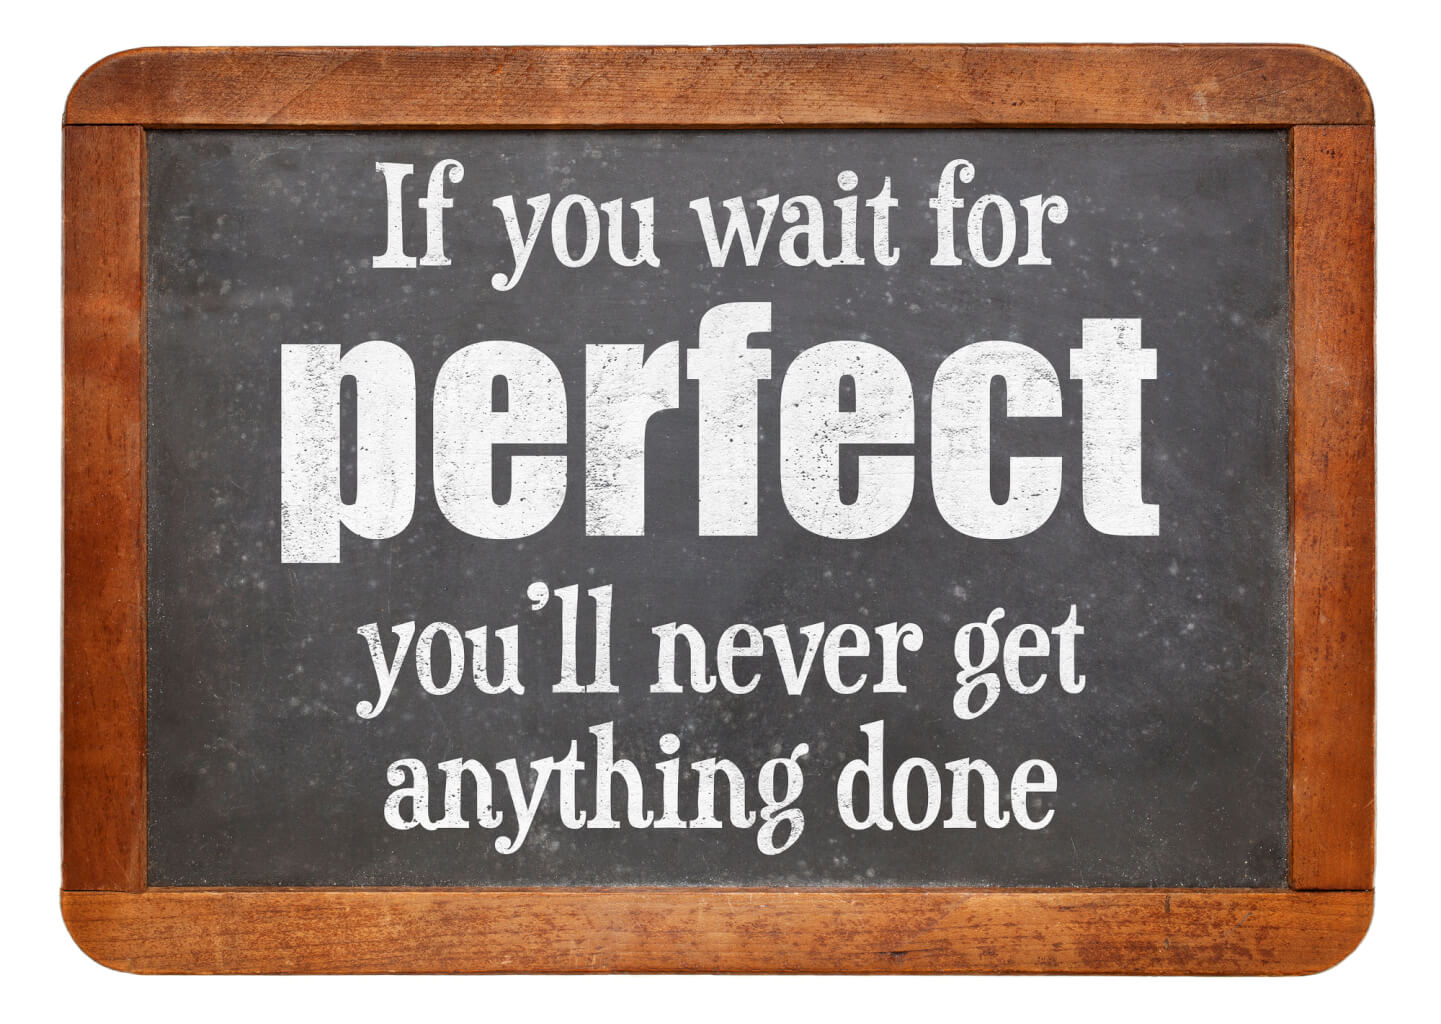 Small blackboard with wood frame. On the blackboard is the comment "If you wait for perfect your never get anything done".